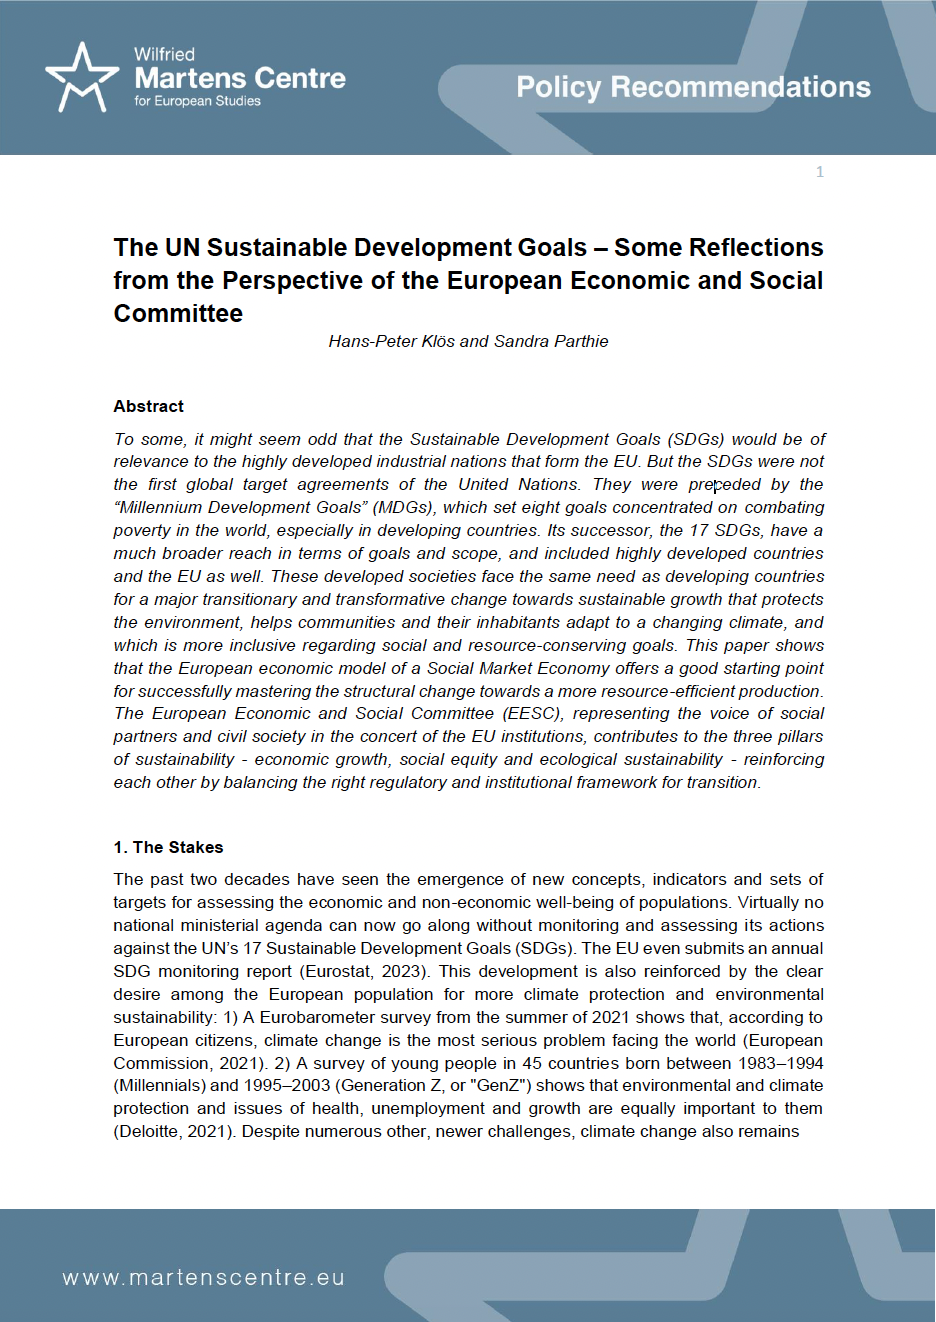 The UN Sustainable Development Goals – Some Reflections from the Perspective of the European Economic and Social Committee 